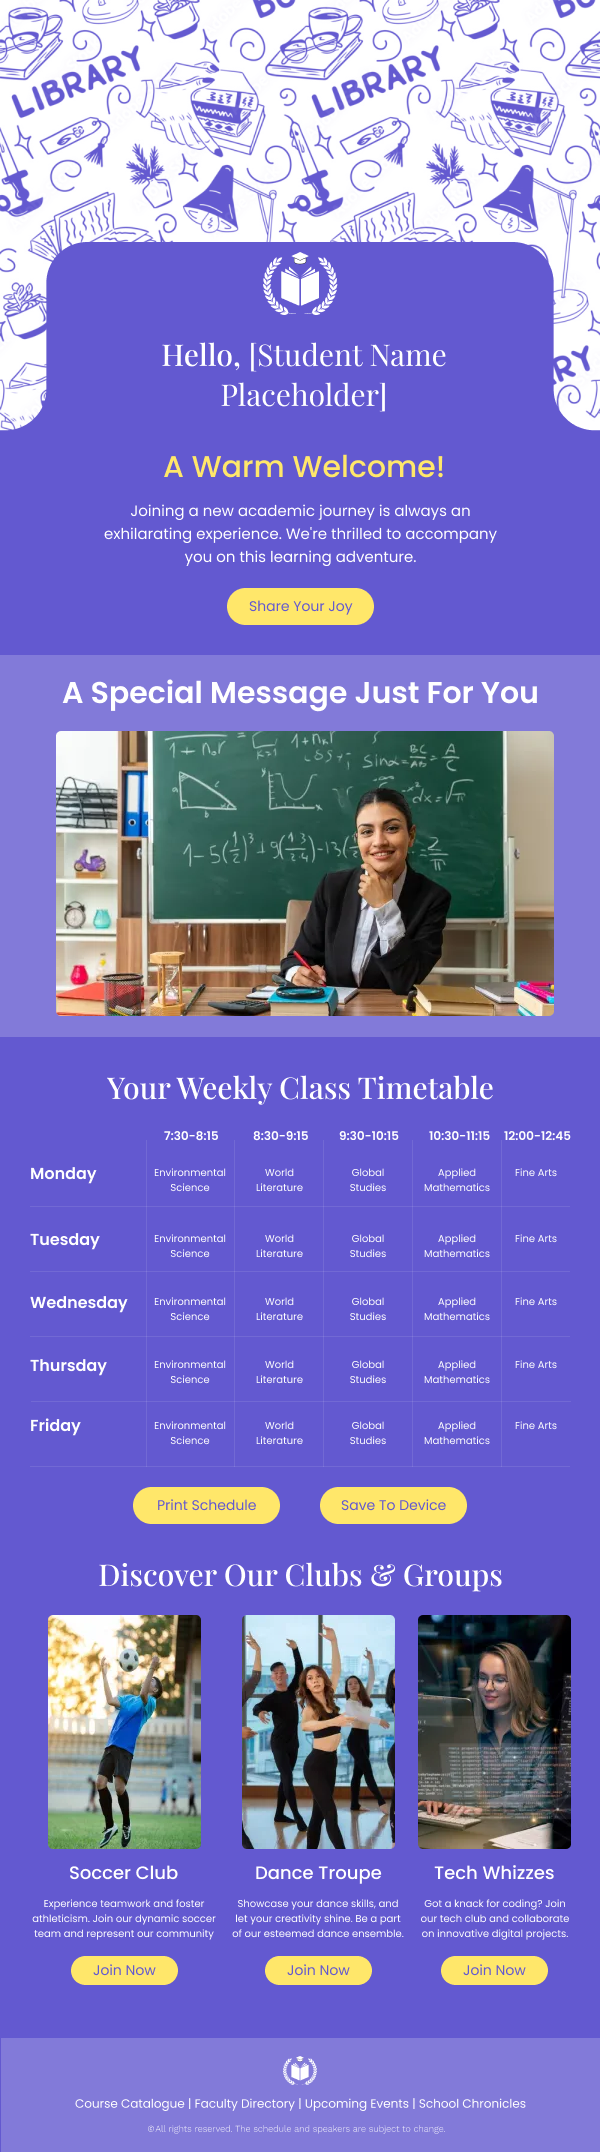 Education-Weekly Class Timetable